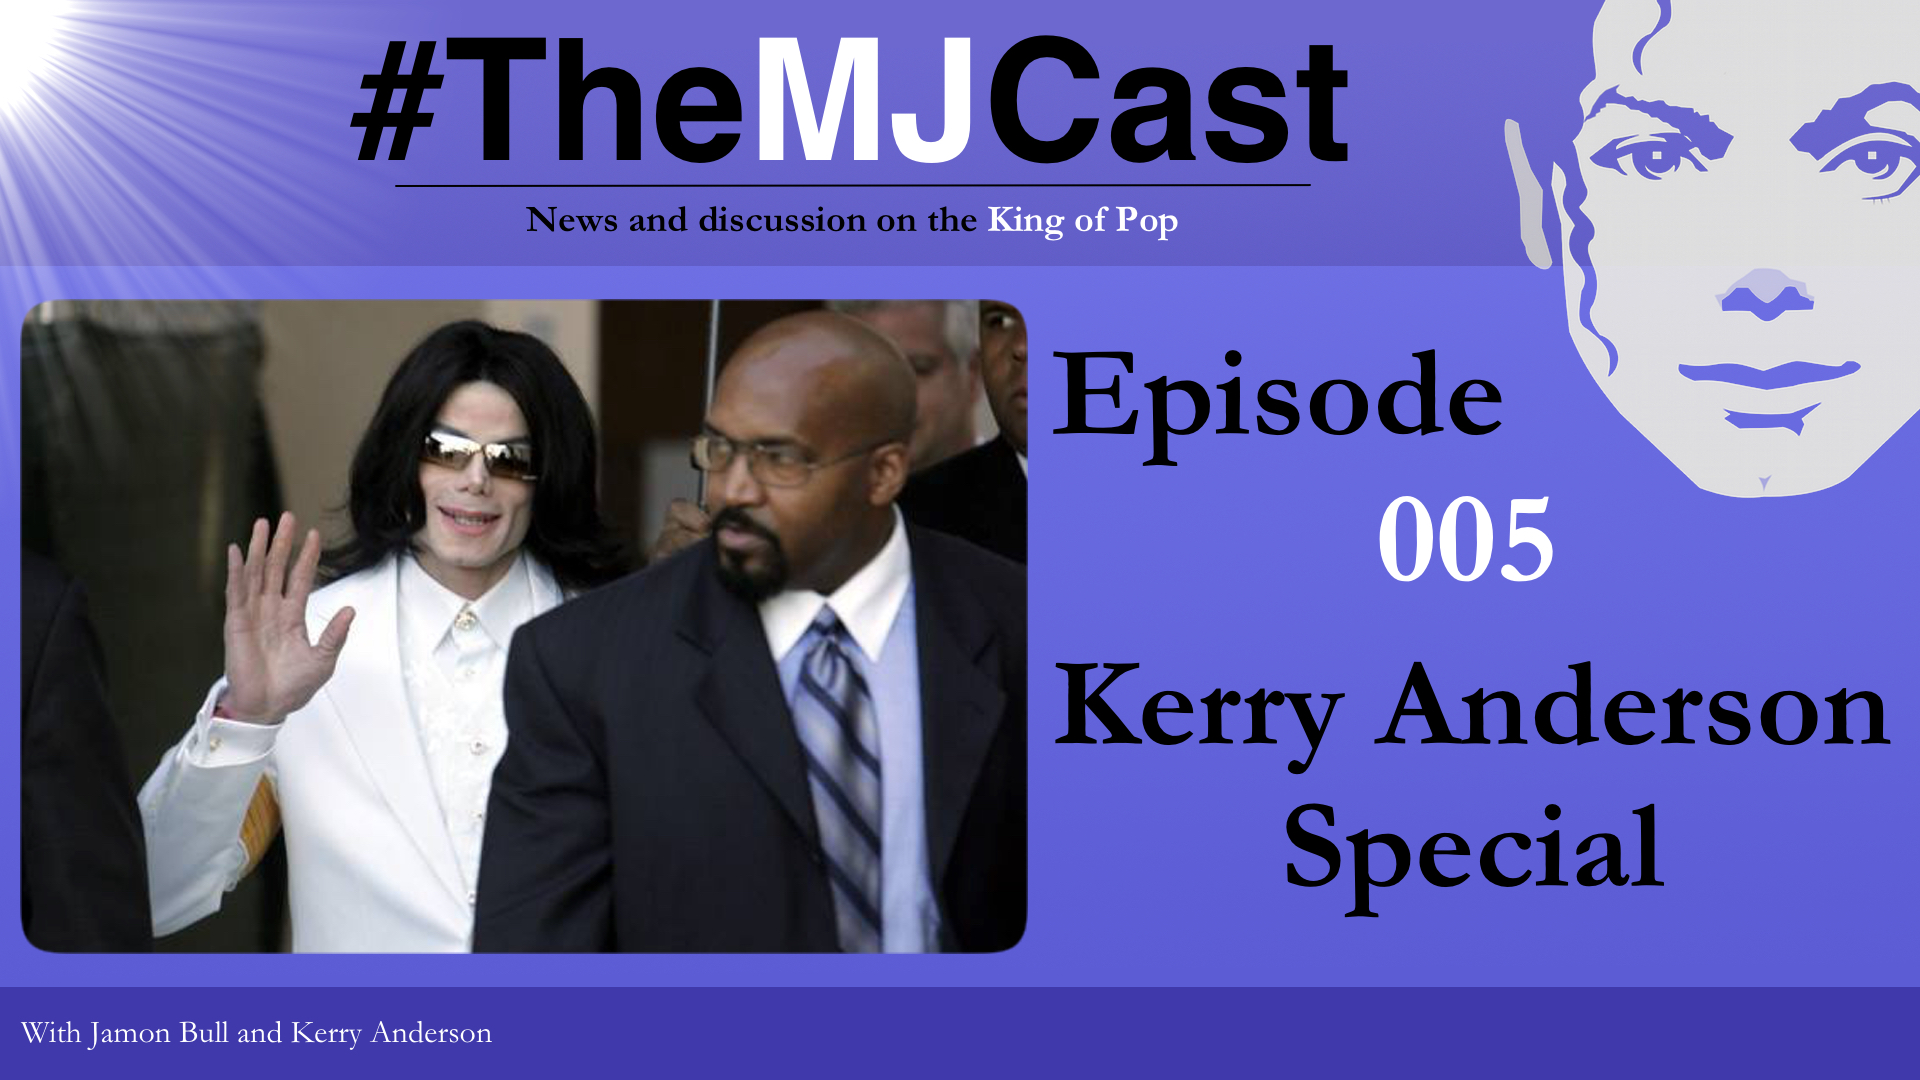 Episode 005 - Kerry Anderson Special YouTube Art